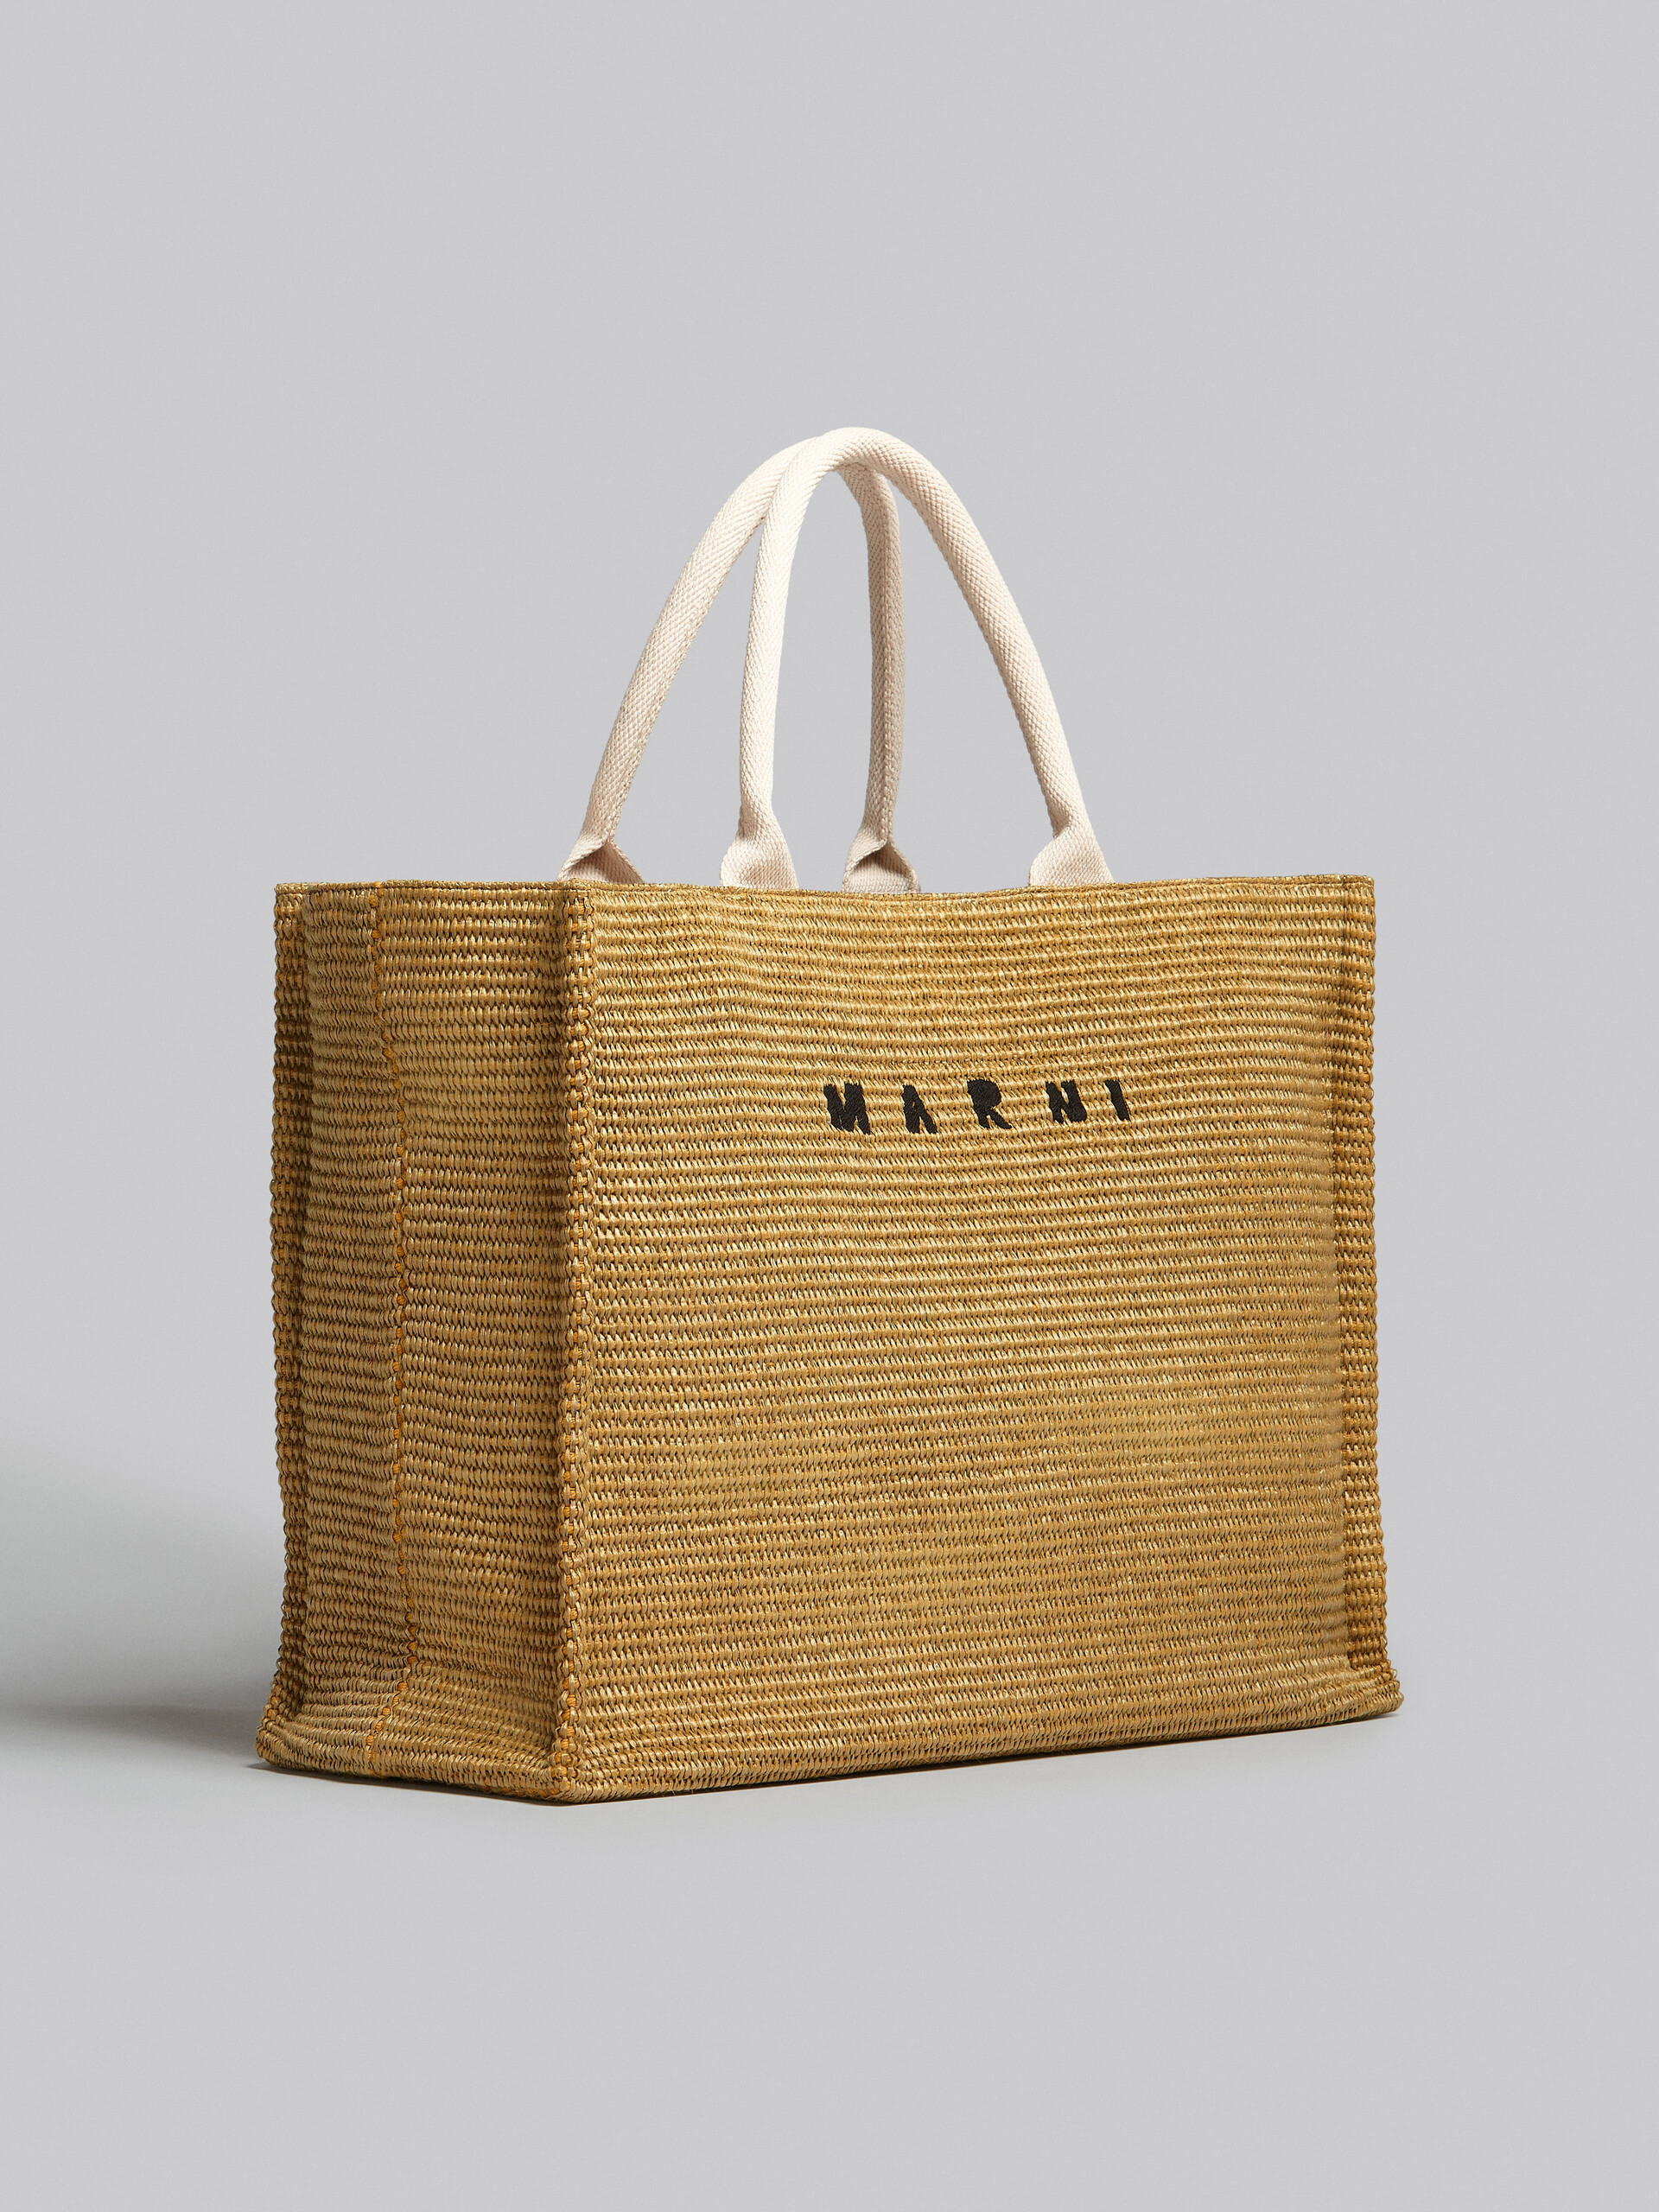 Large Tote in natural-coloured raffia-effect fabric - Shopping Bags - Image 6